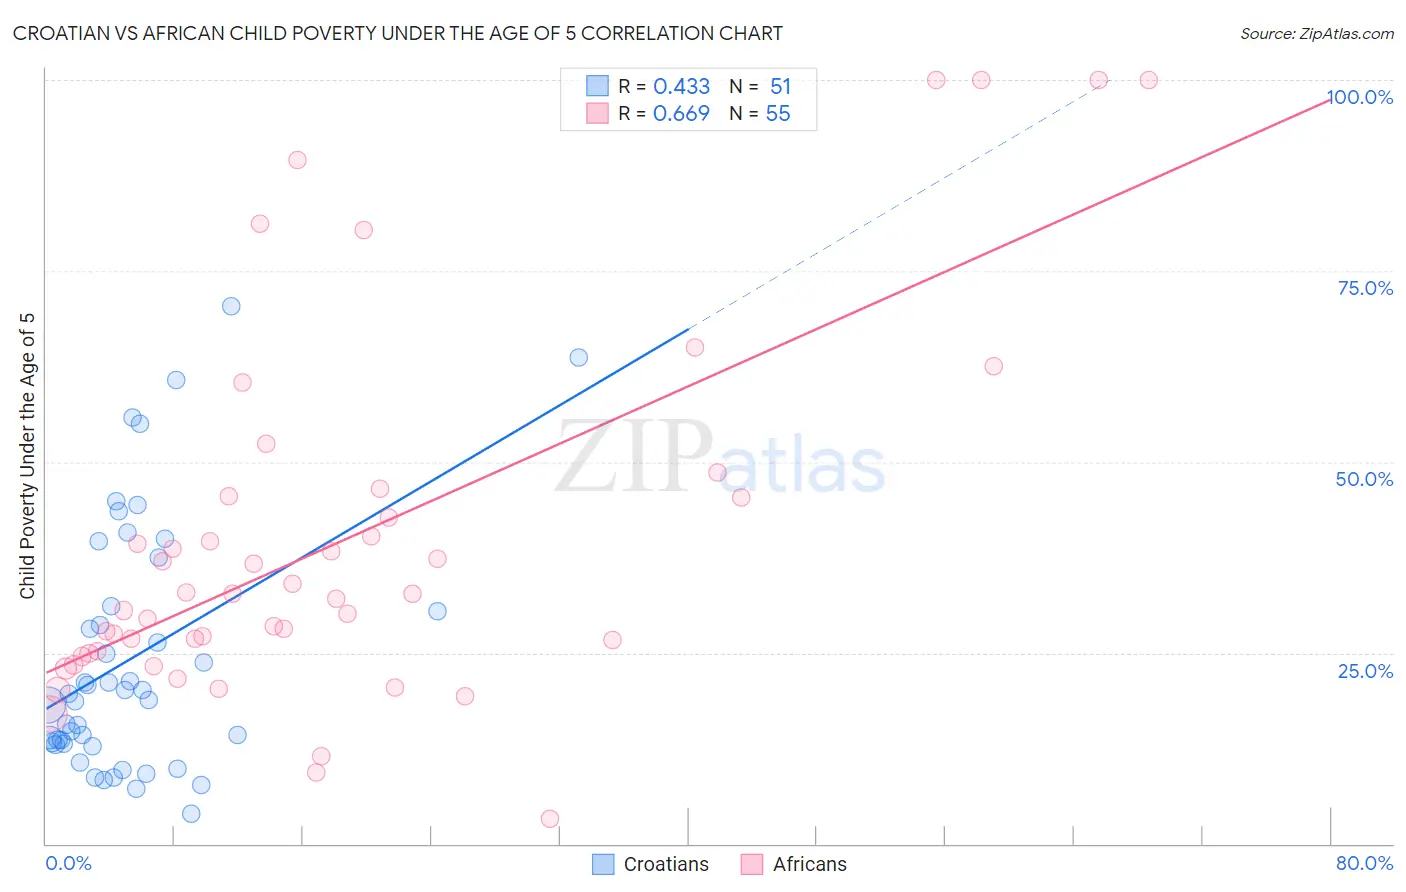 Croatian vs African Child Poverty Under the Age of 5